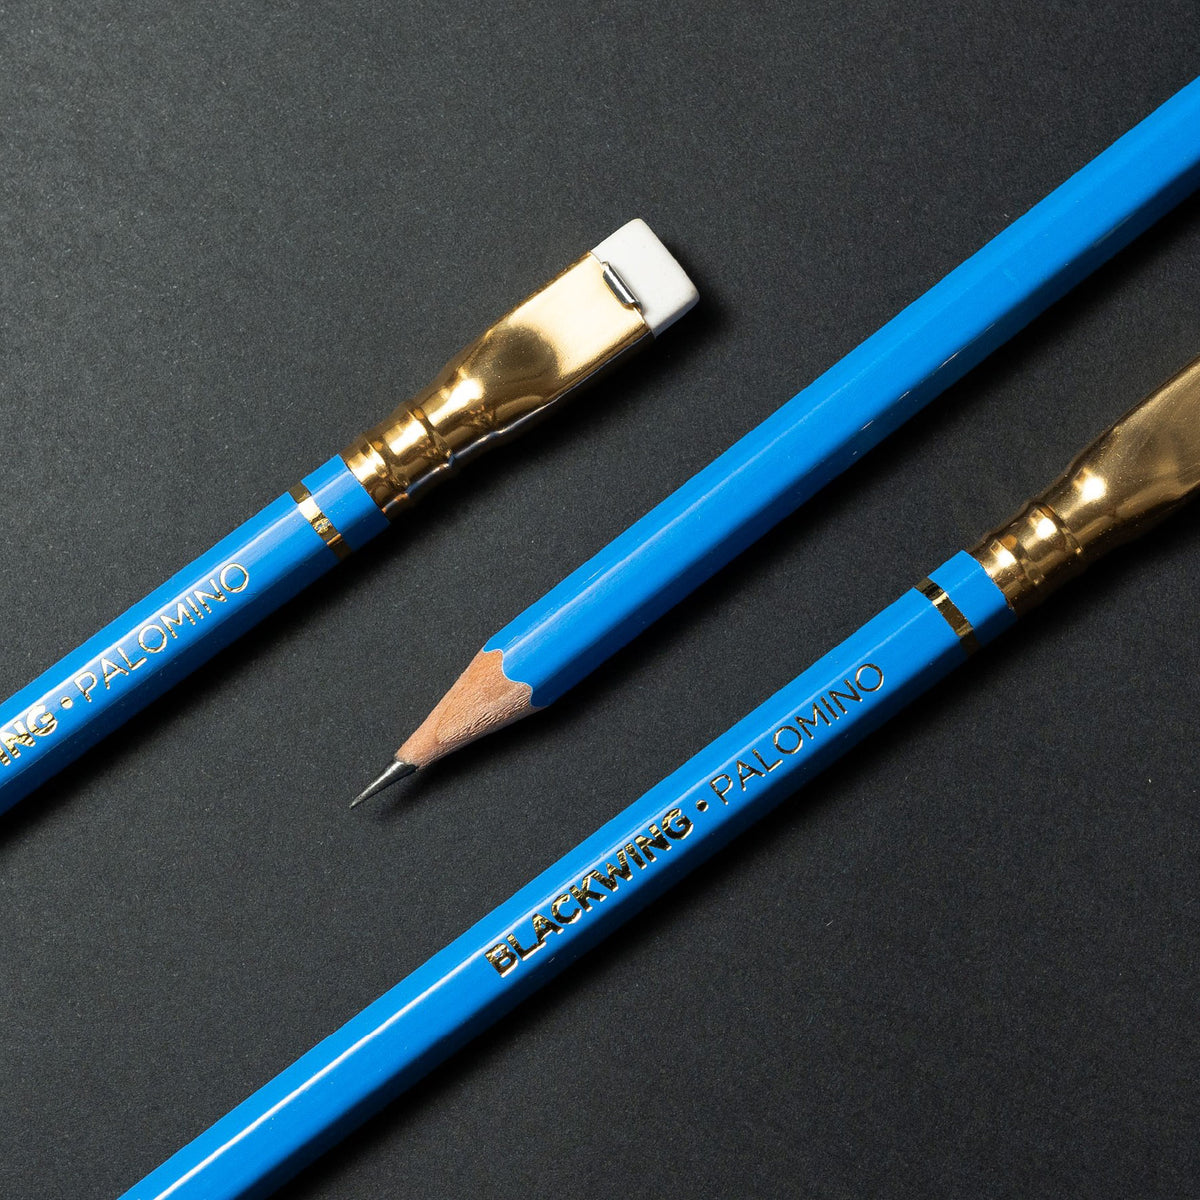 Palomino Blackwing - Pencil - Blackwing Eras 2 - Blue - Pack of 2 (Limited Edition)